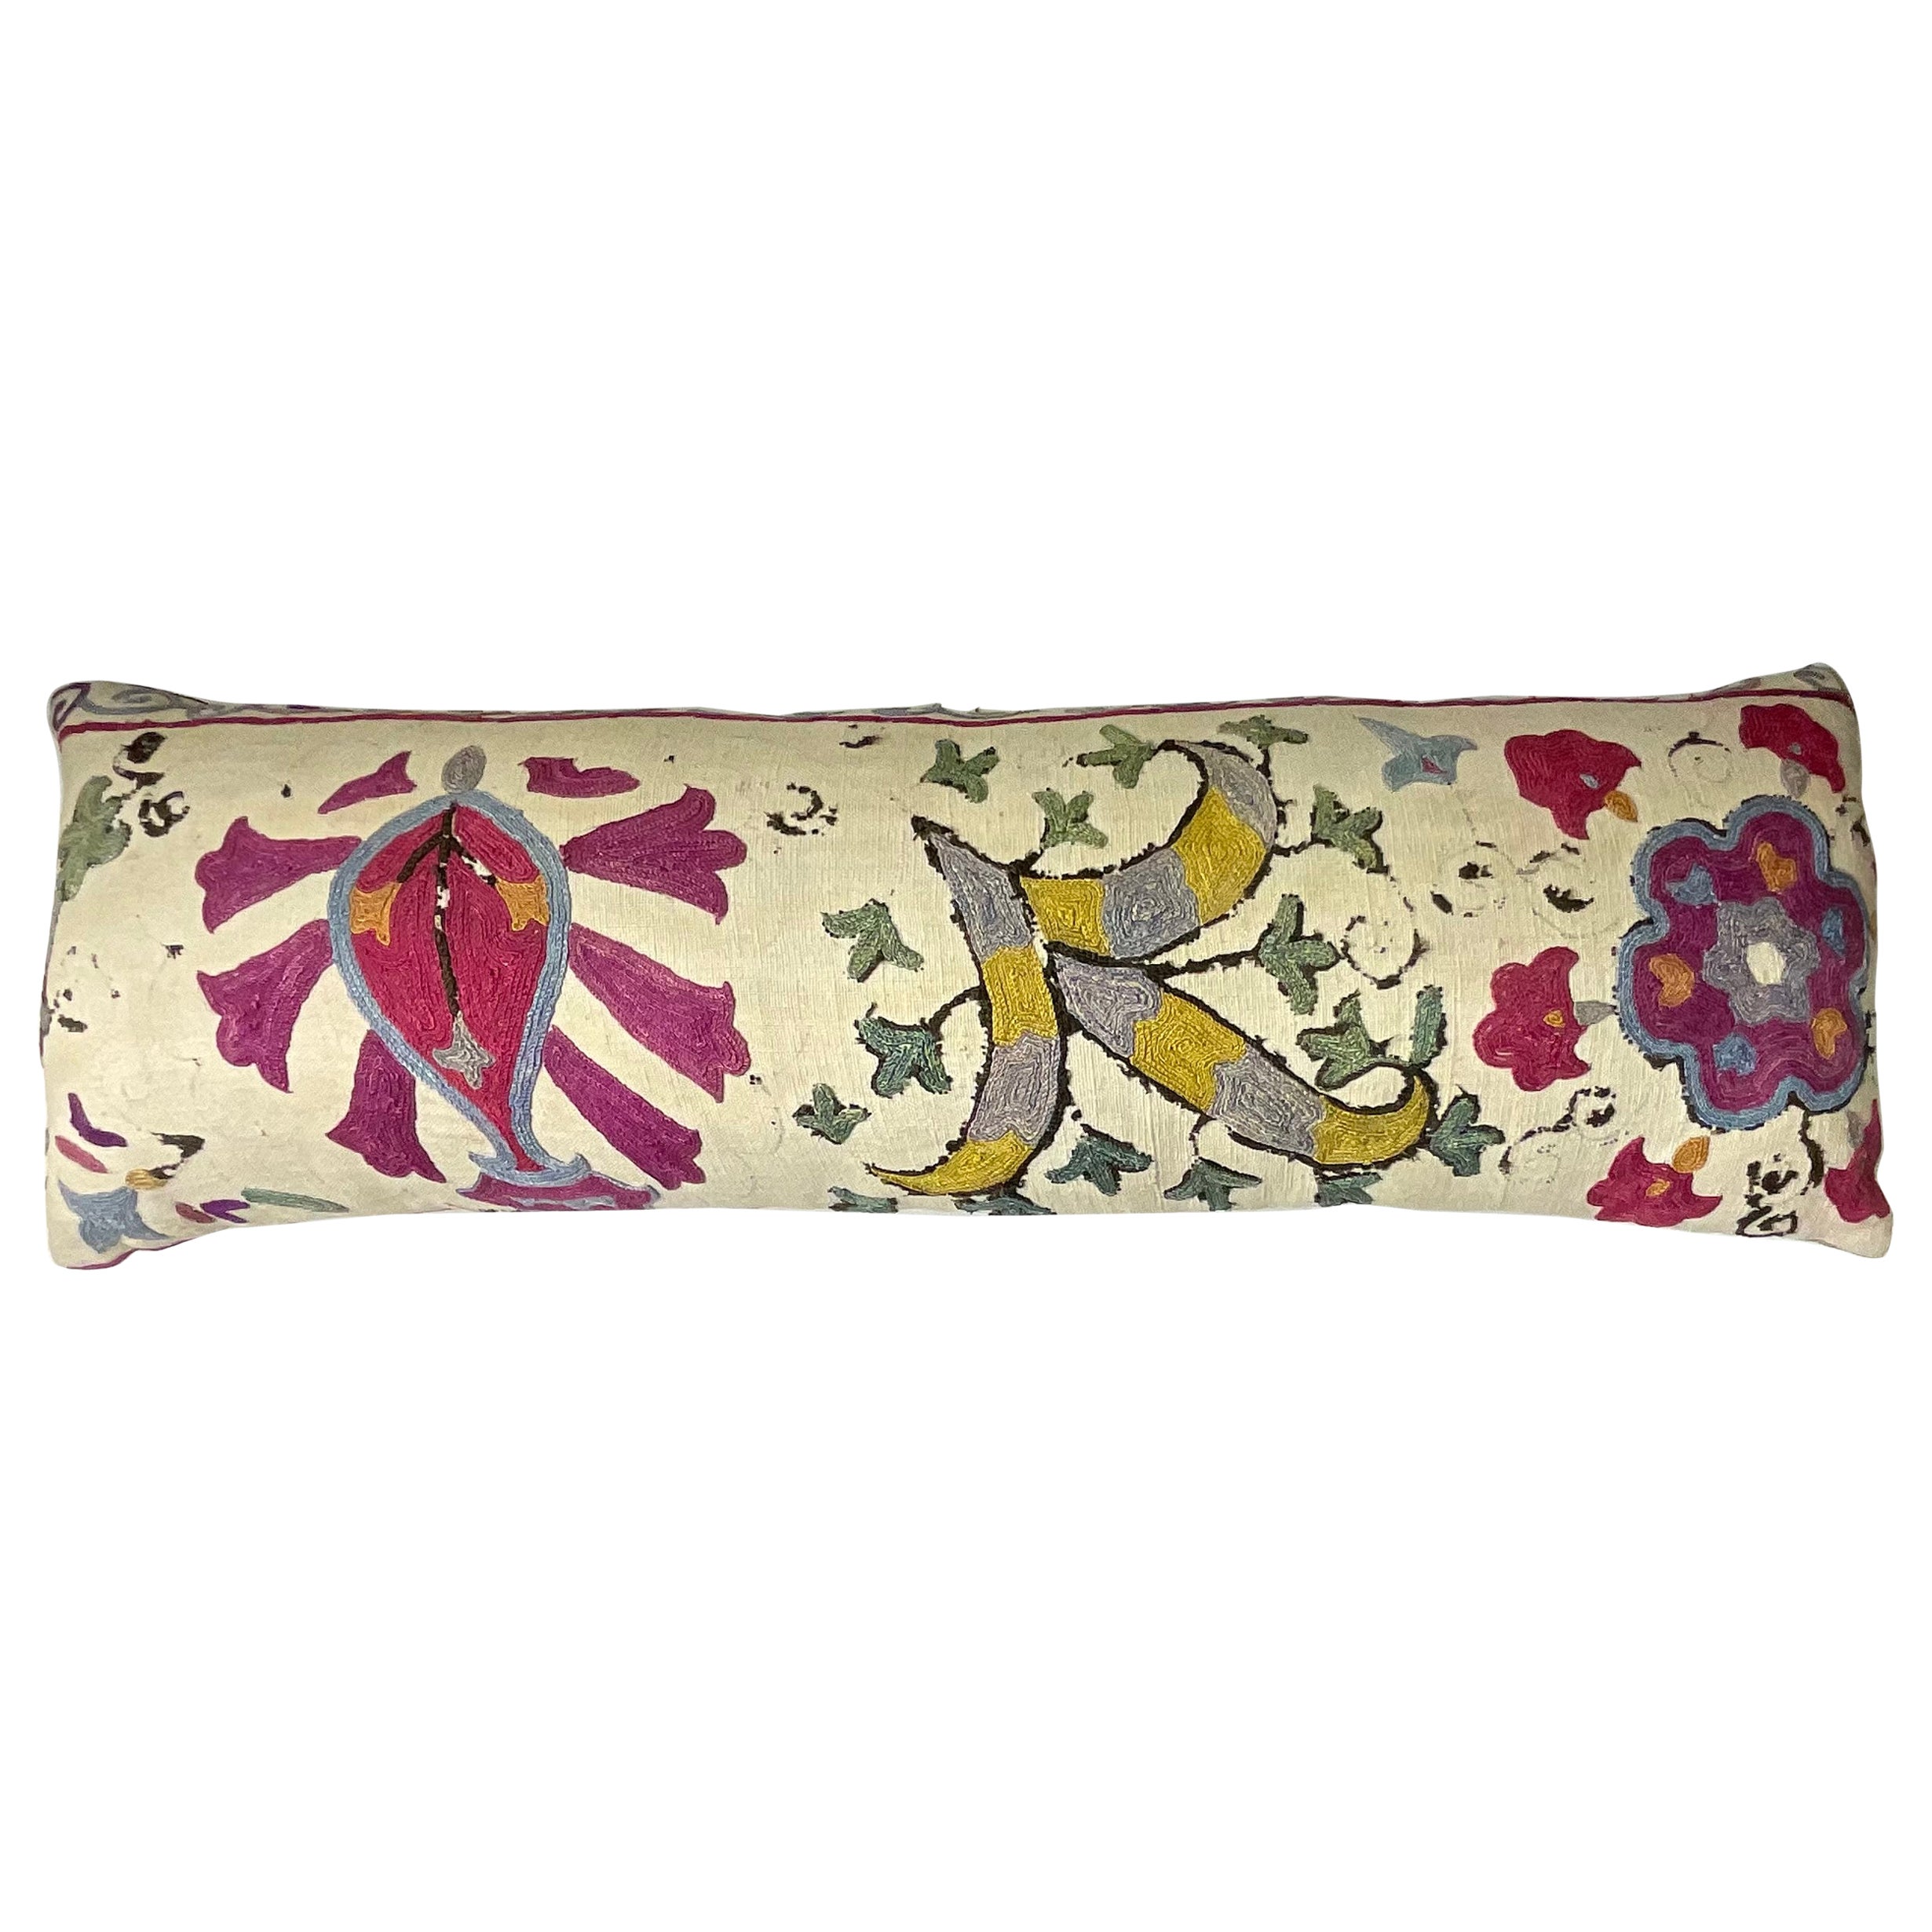 Single Long Antique Silk Embroidery Suzani Pillow For Sale